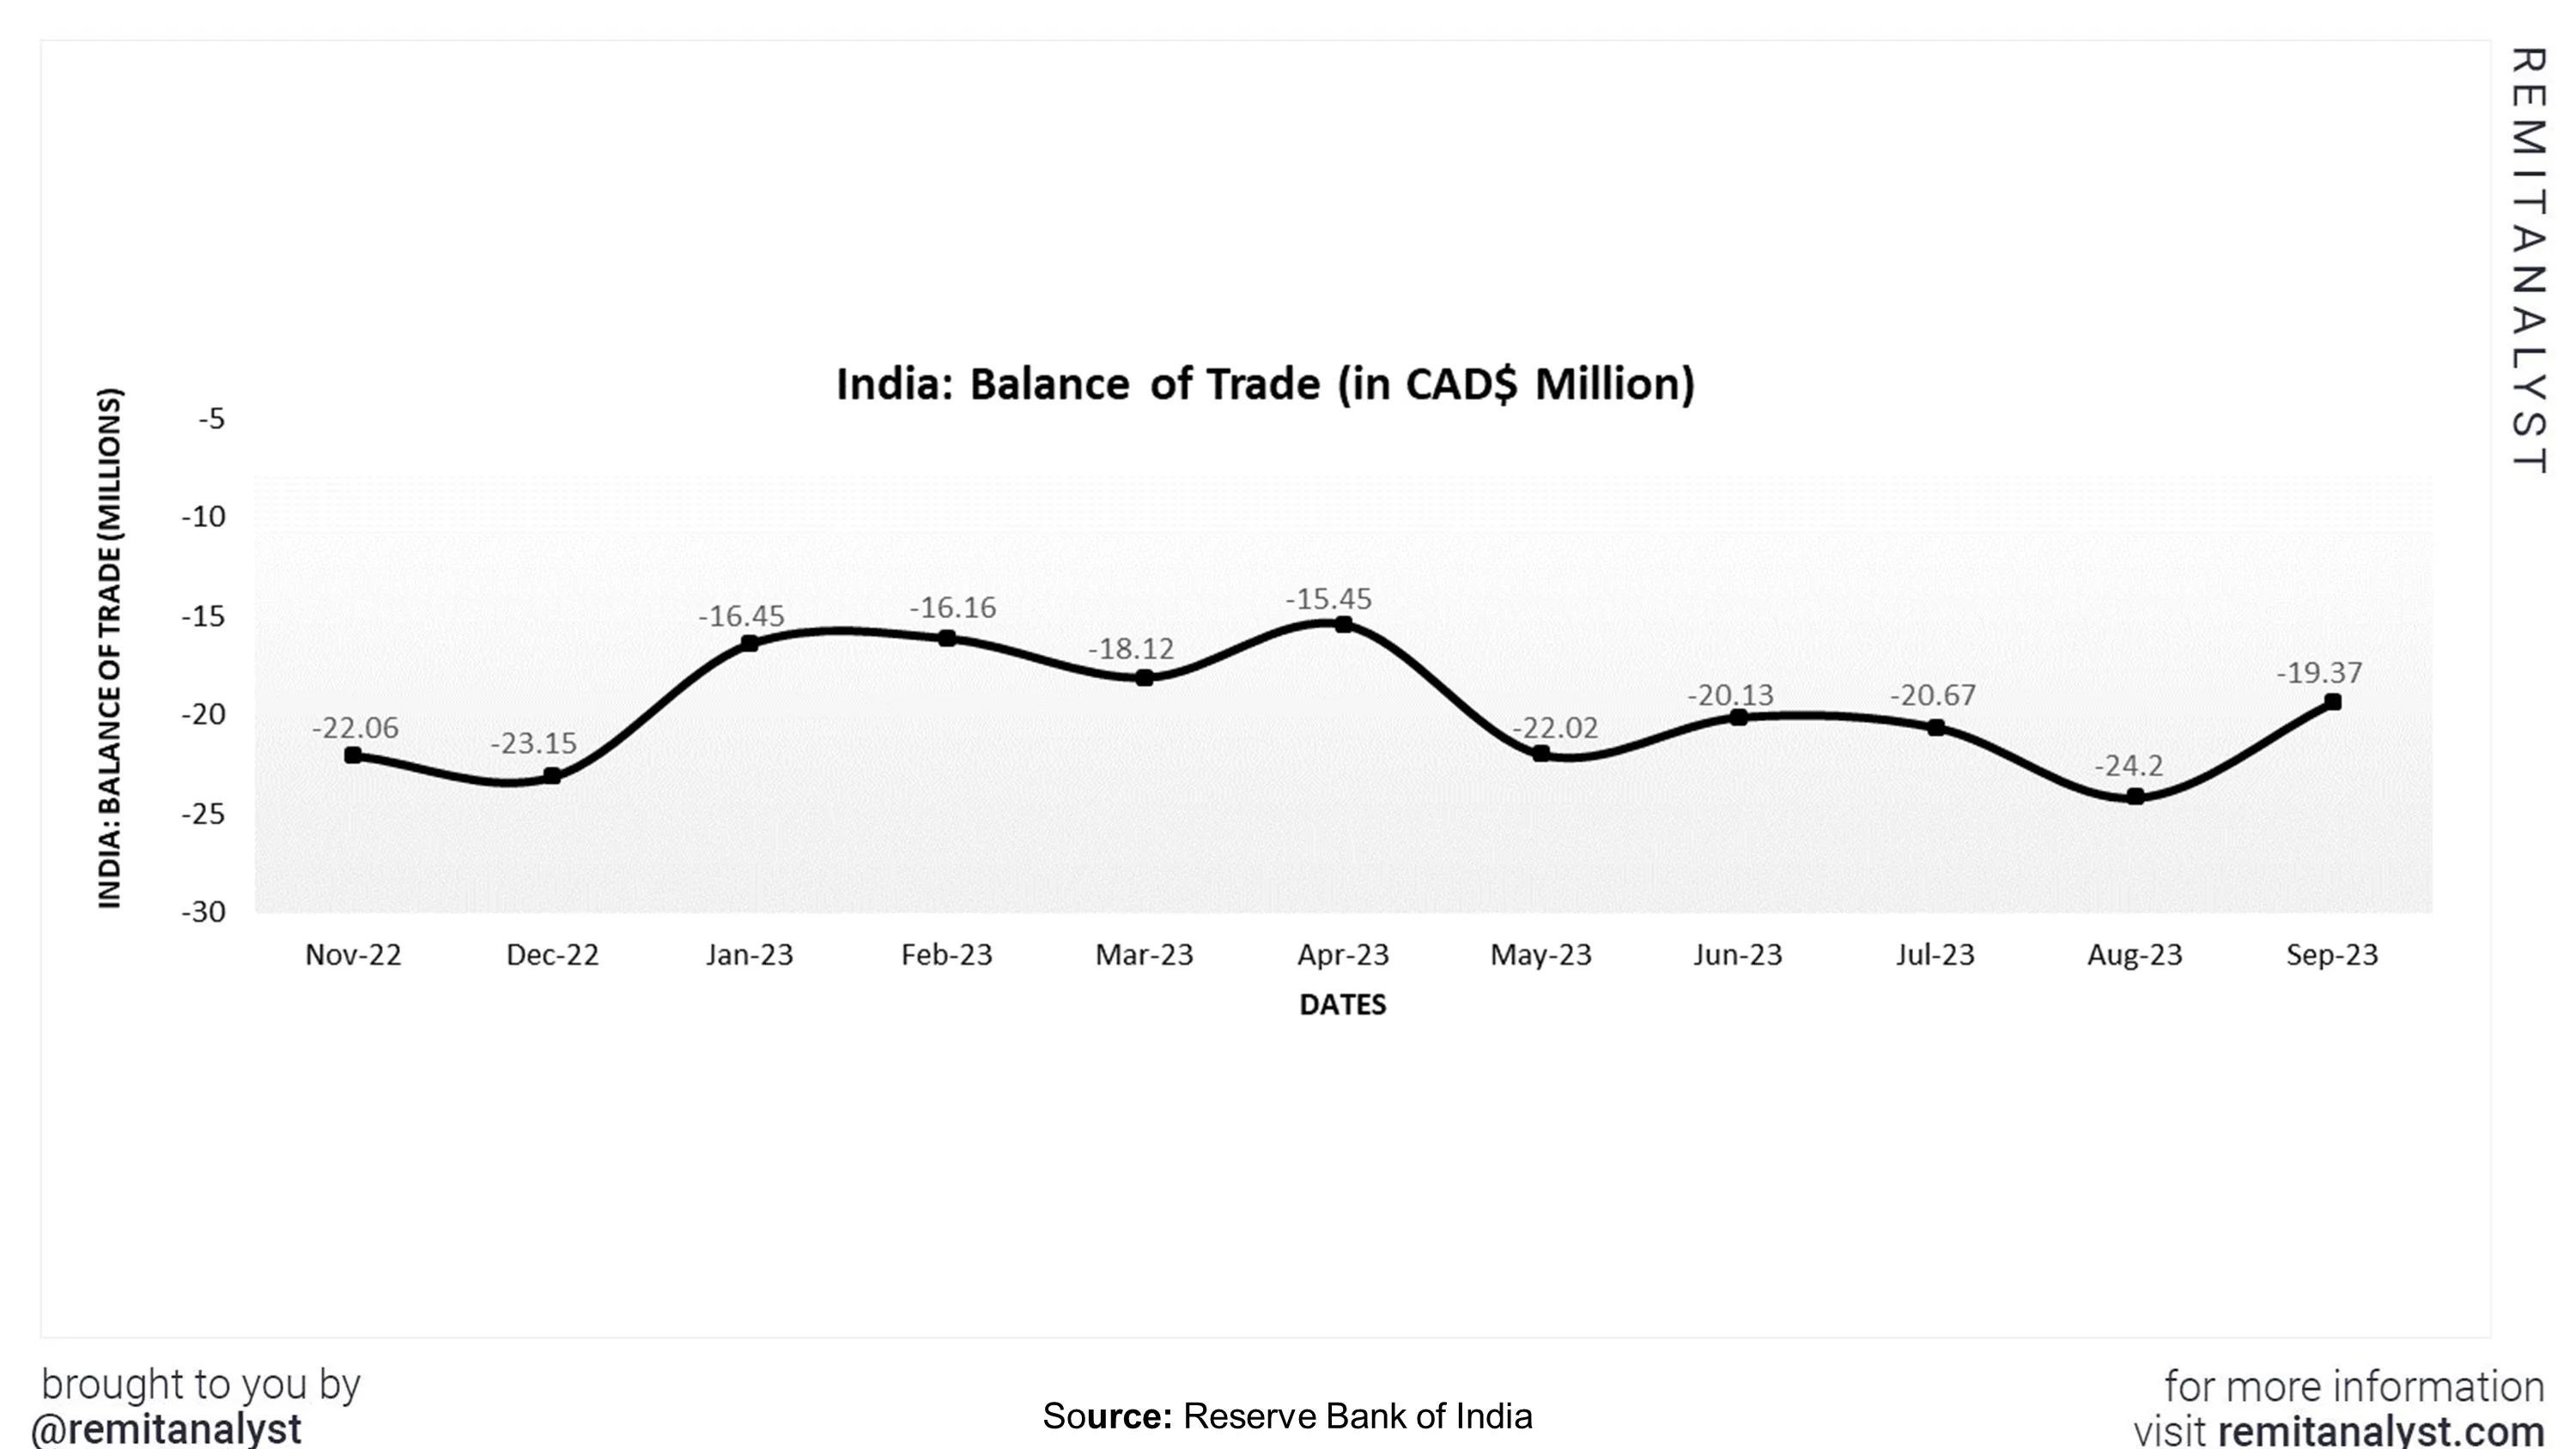 balance-of-trade-india-from-nov-2022-to-sep-2023